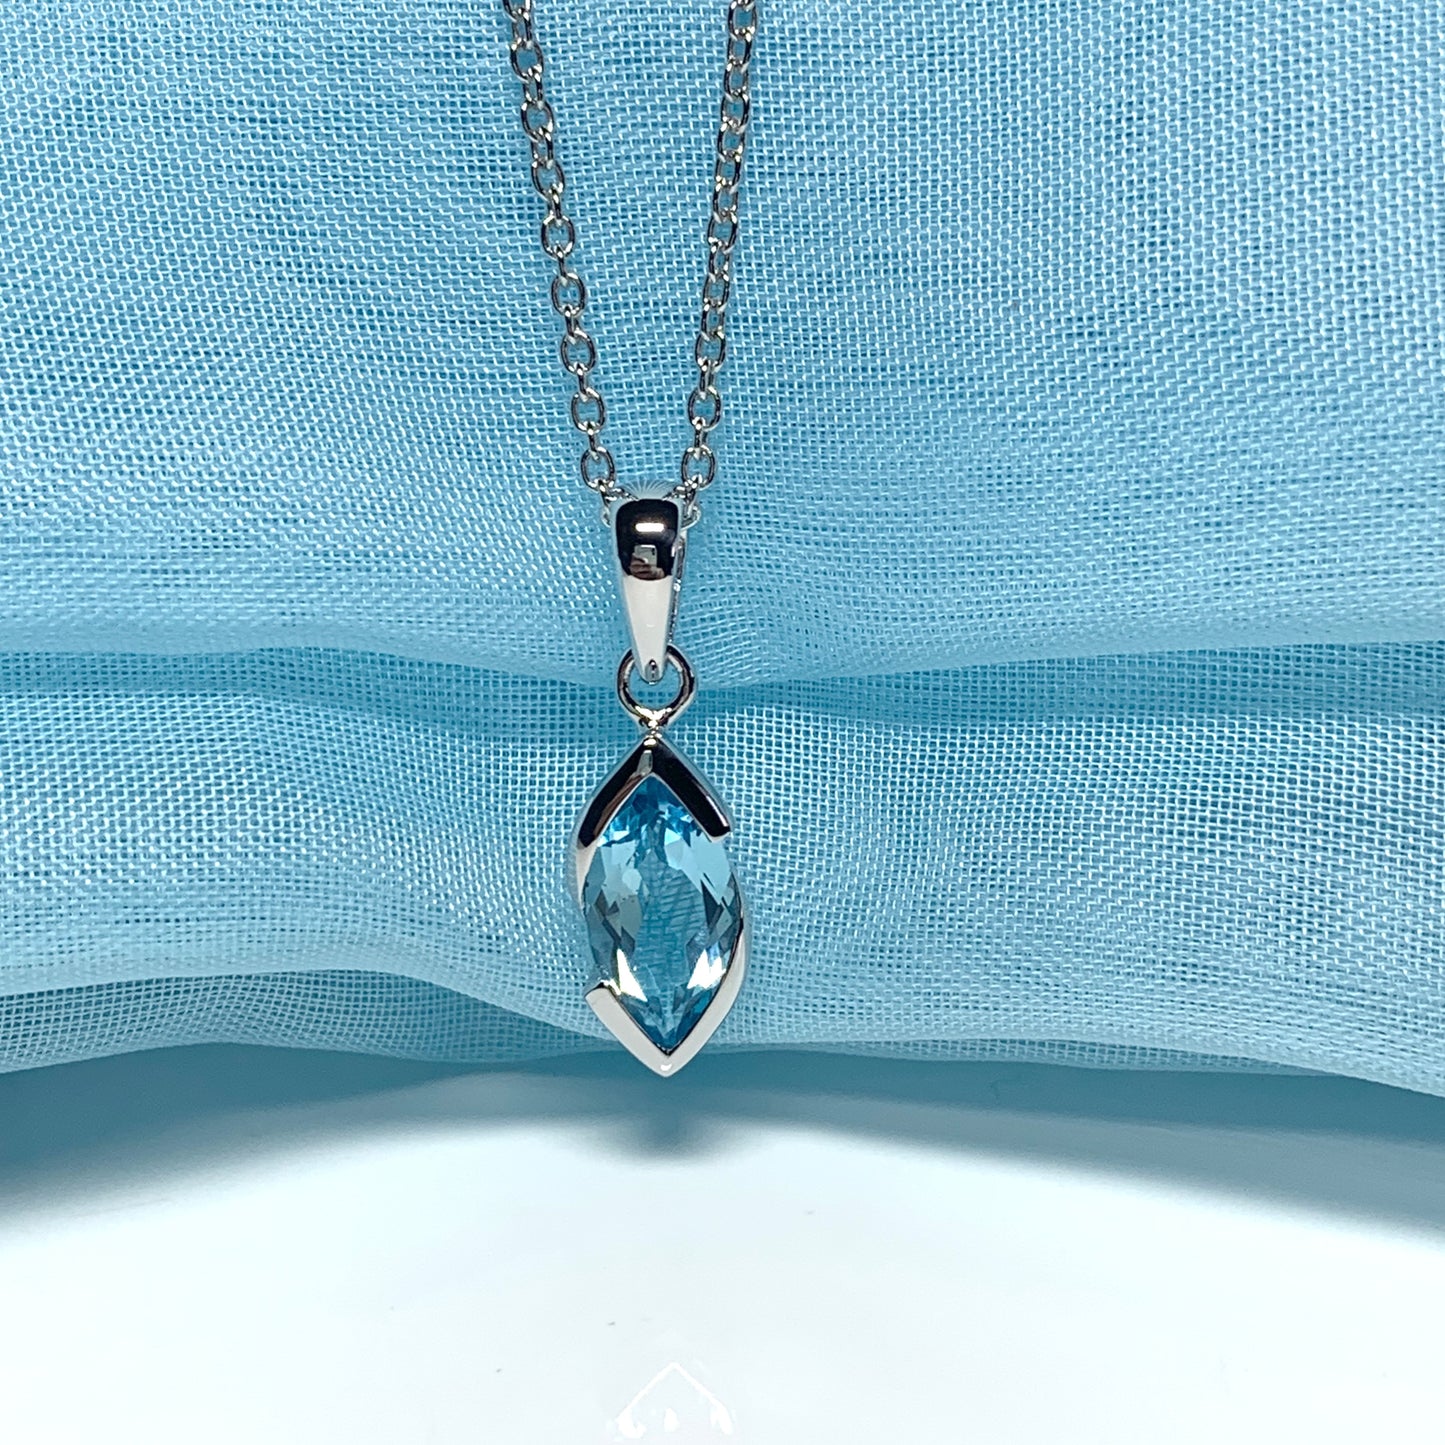 Real blue topaz necklace pendant marquise smooth rubbed over setting